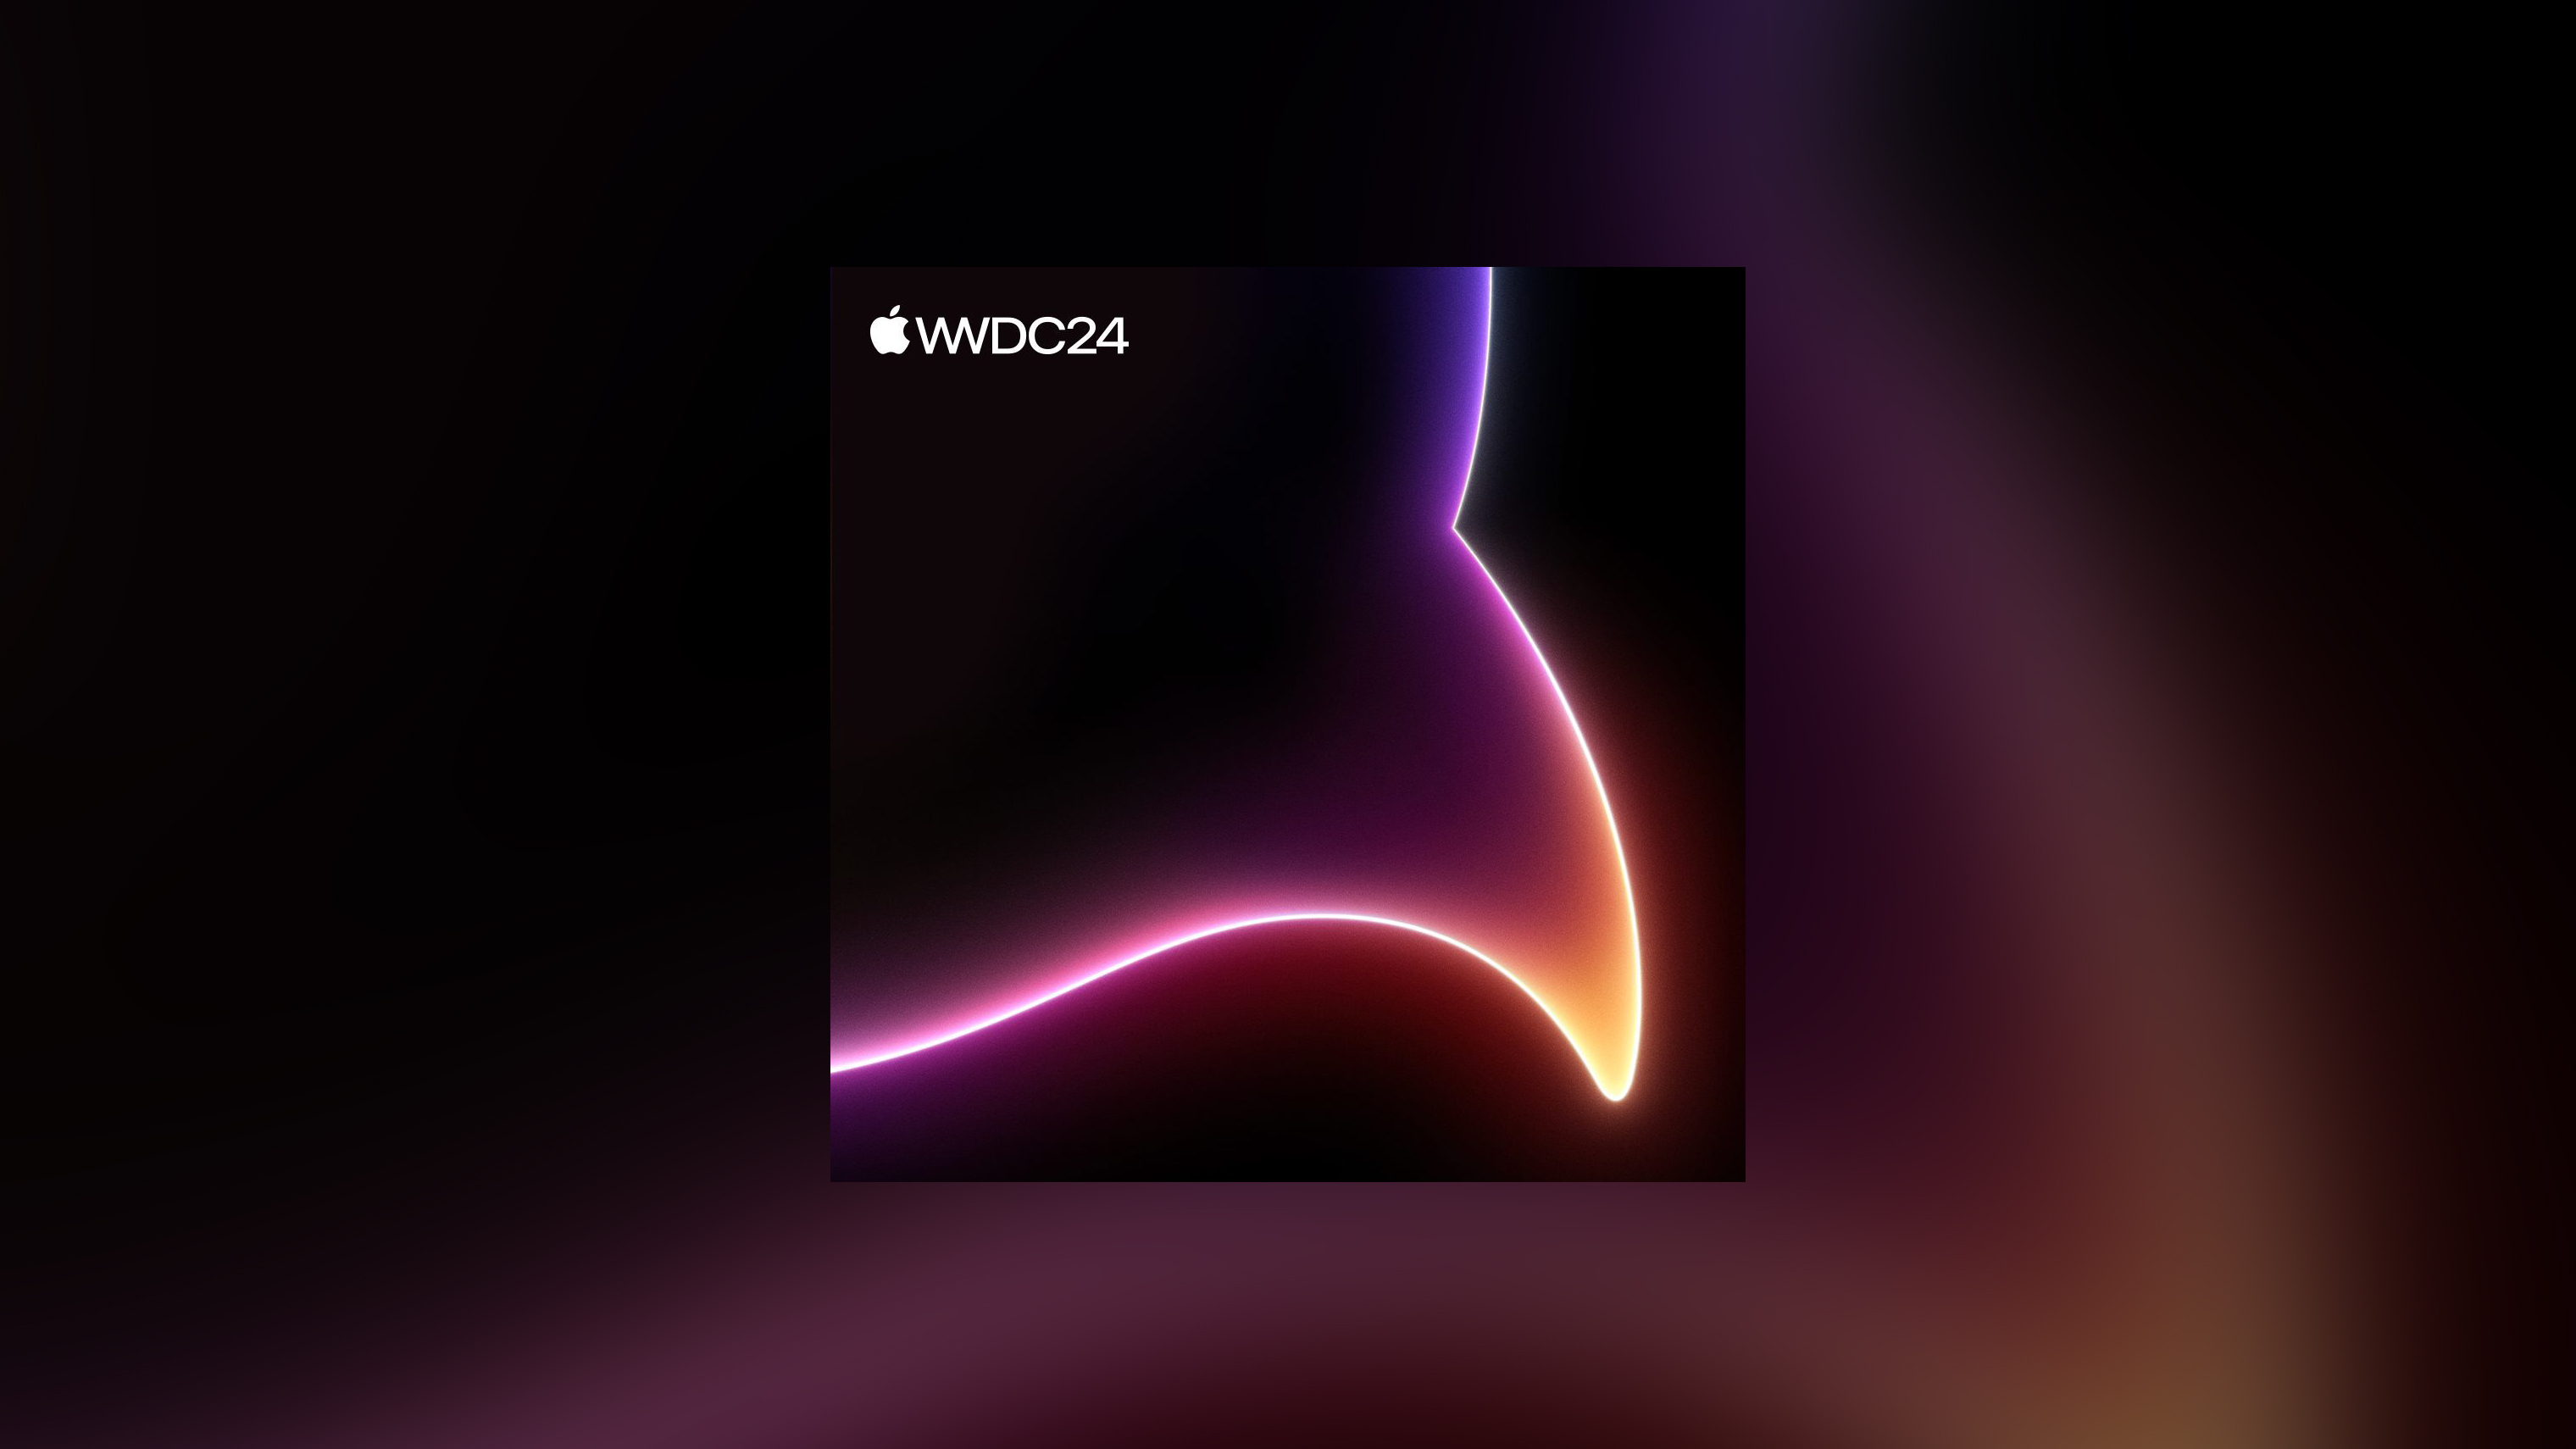 Listen to Apple’s official “WWDC24 Hello” playlist